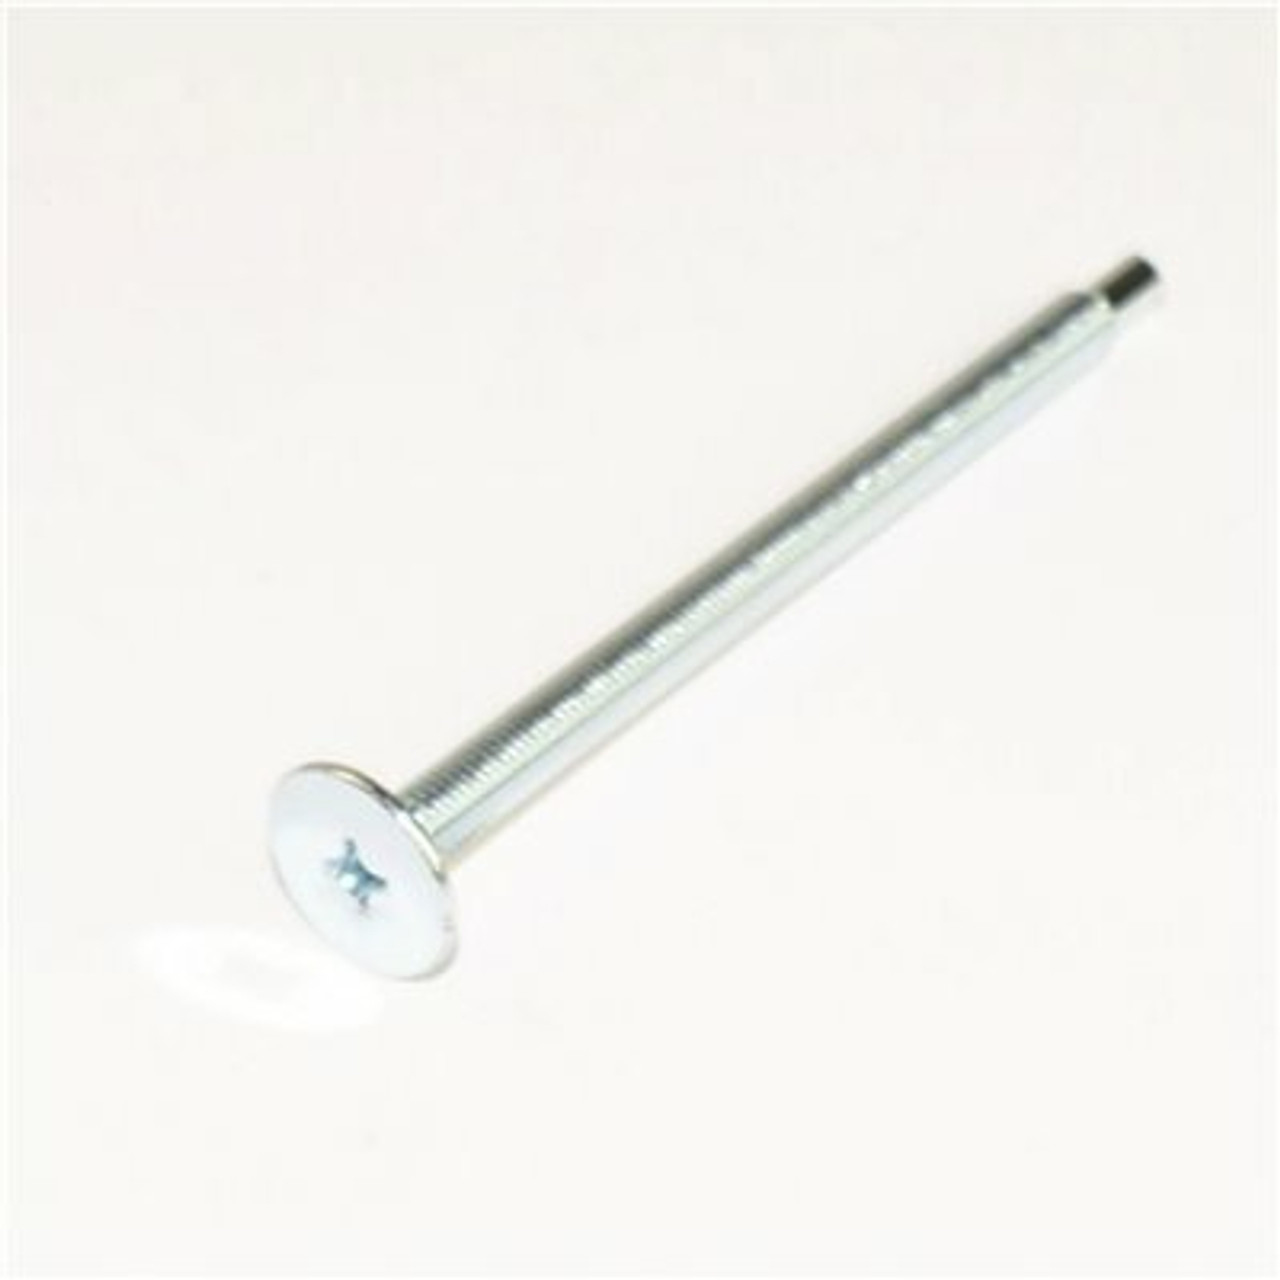 Samsung Mounting Flat Bolt For Microwave